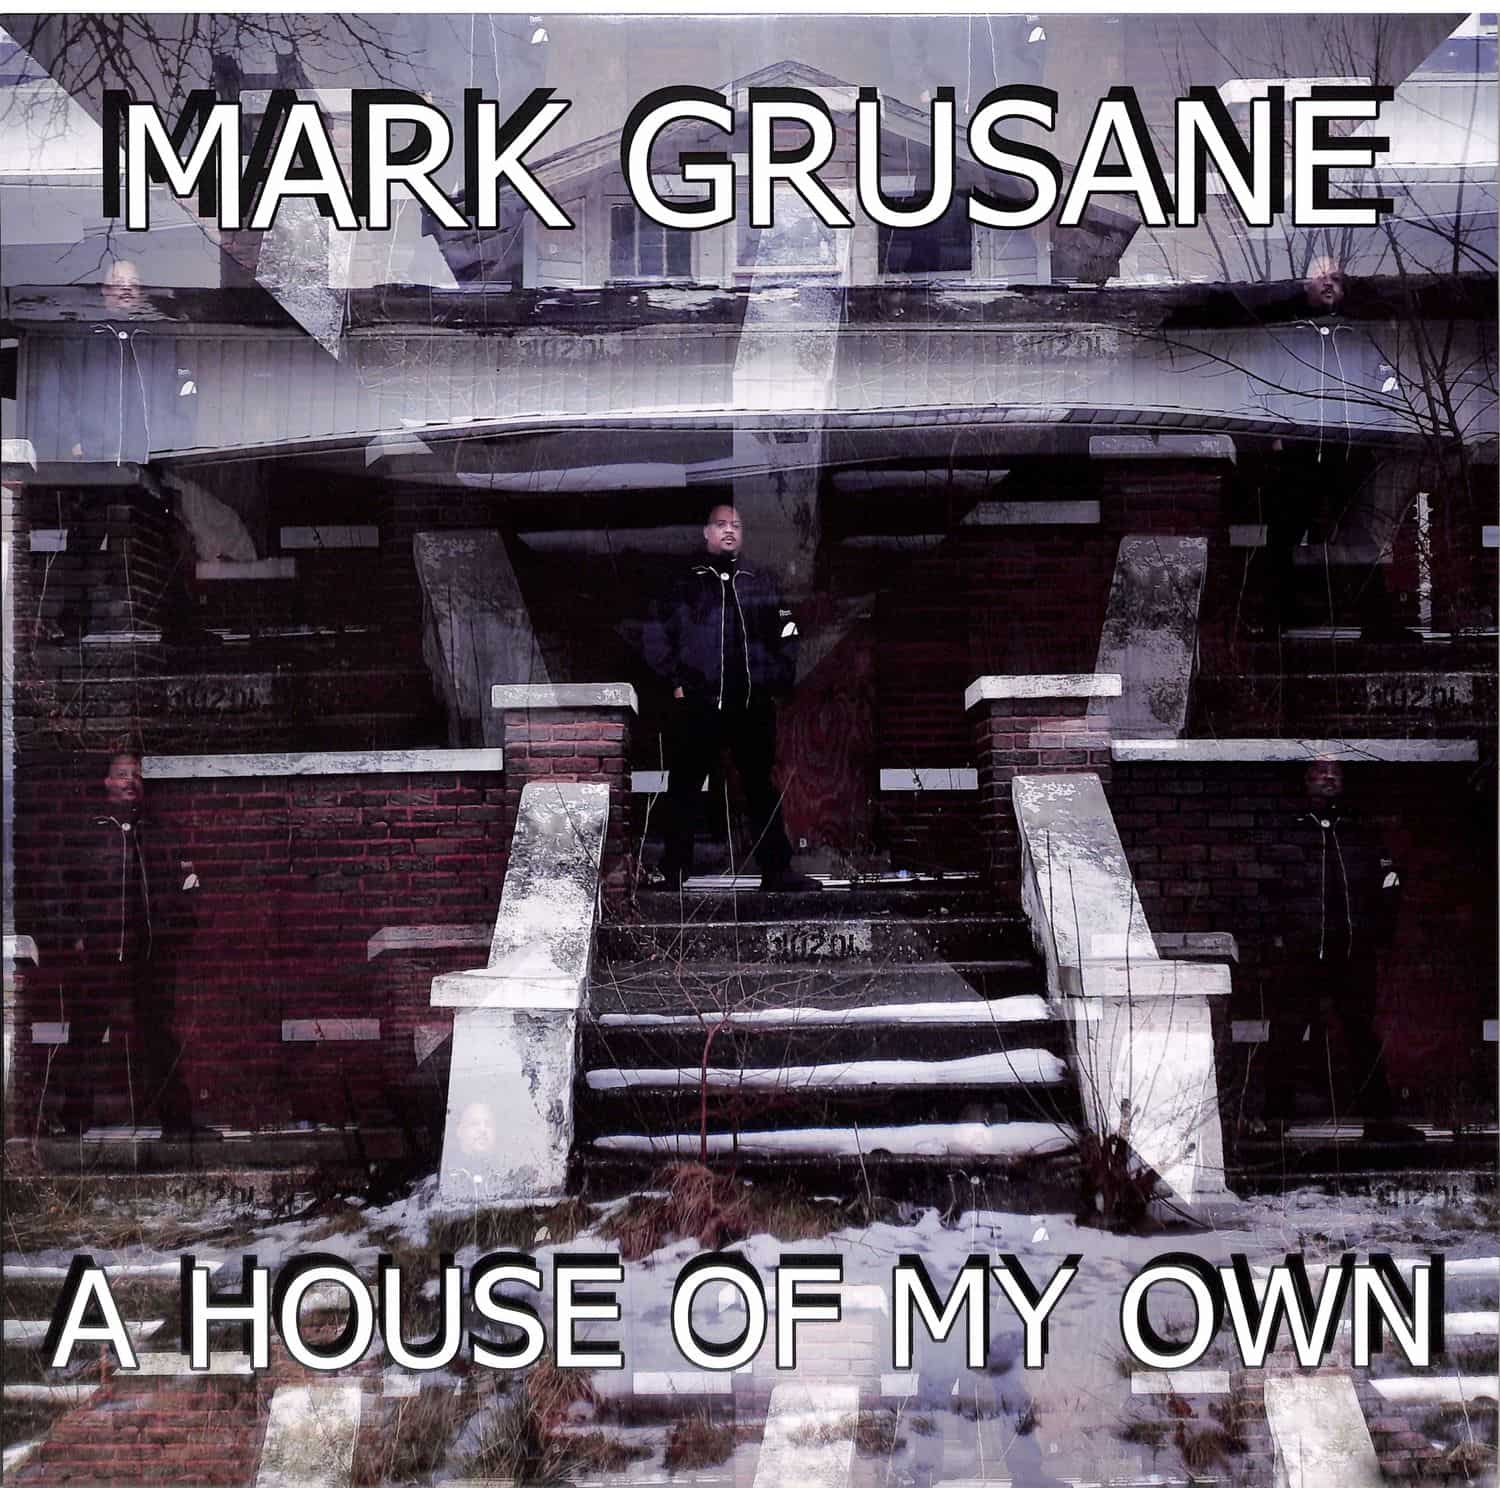 Mark Grusane - A HOUSE OF MY OWN 